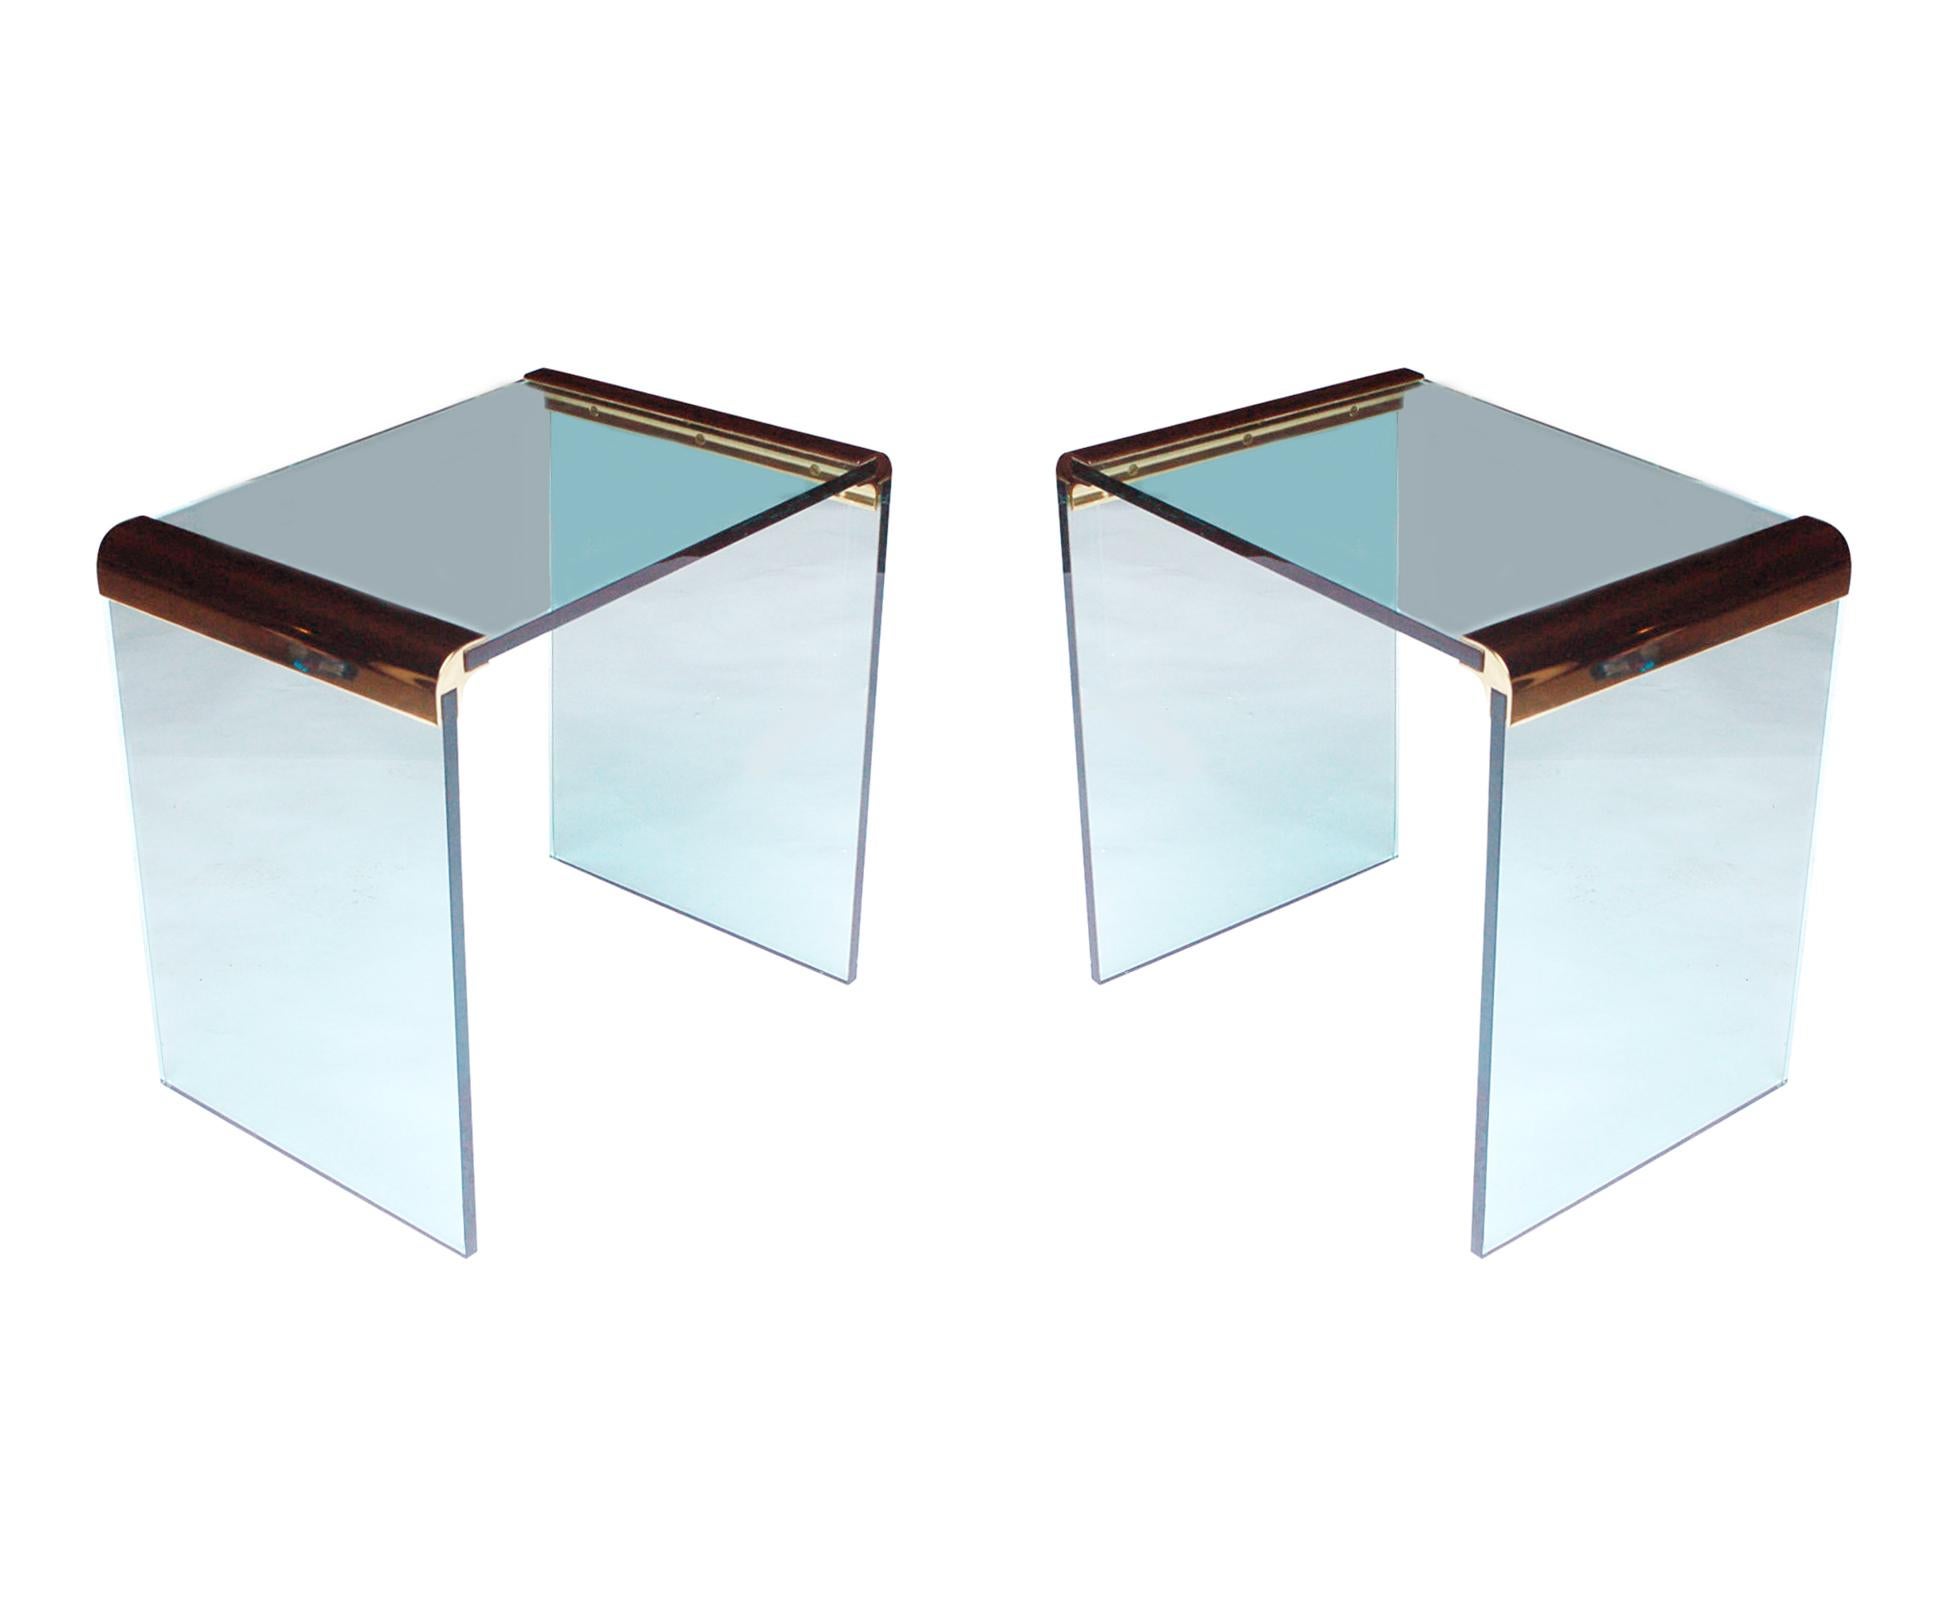 American Mid-Century Modern Brass & Glass Pair of End Tables by Leon Rosen for Pace